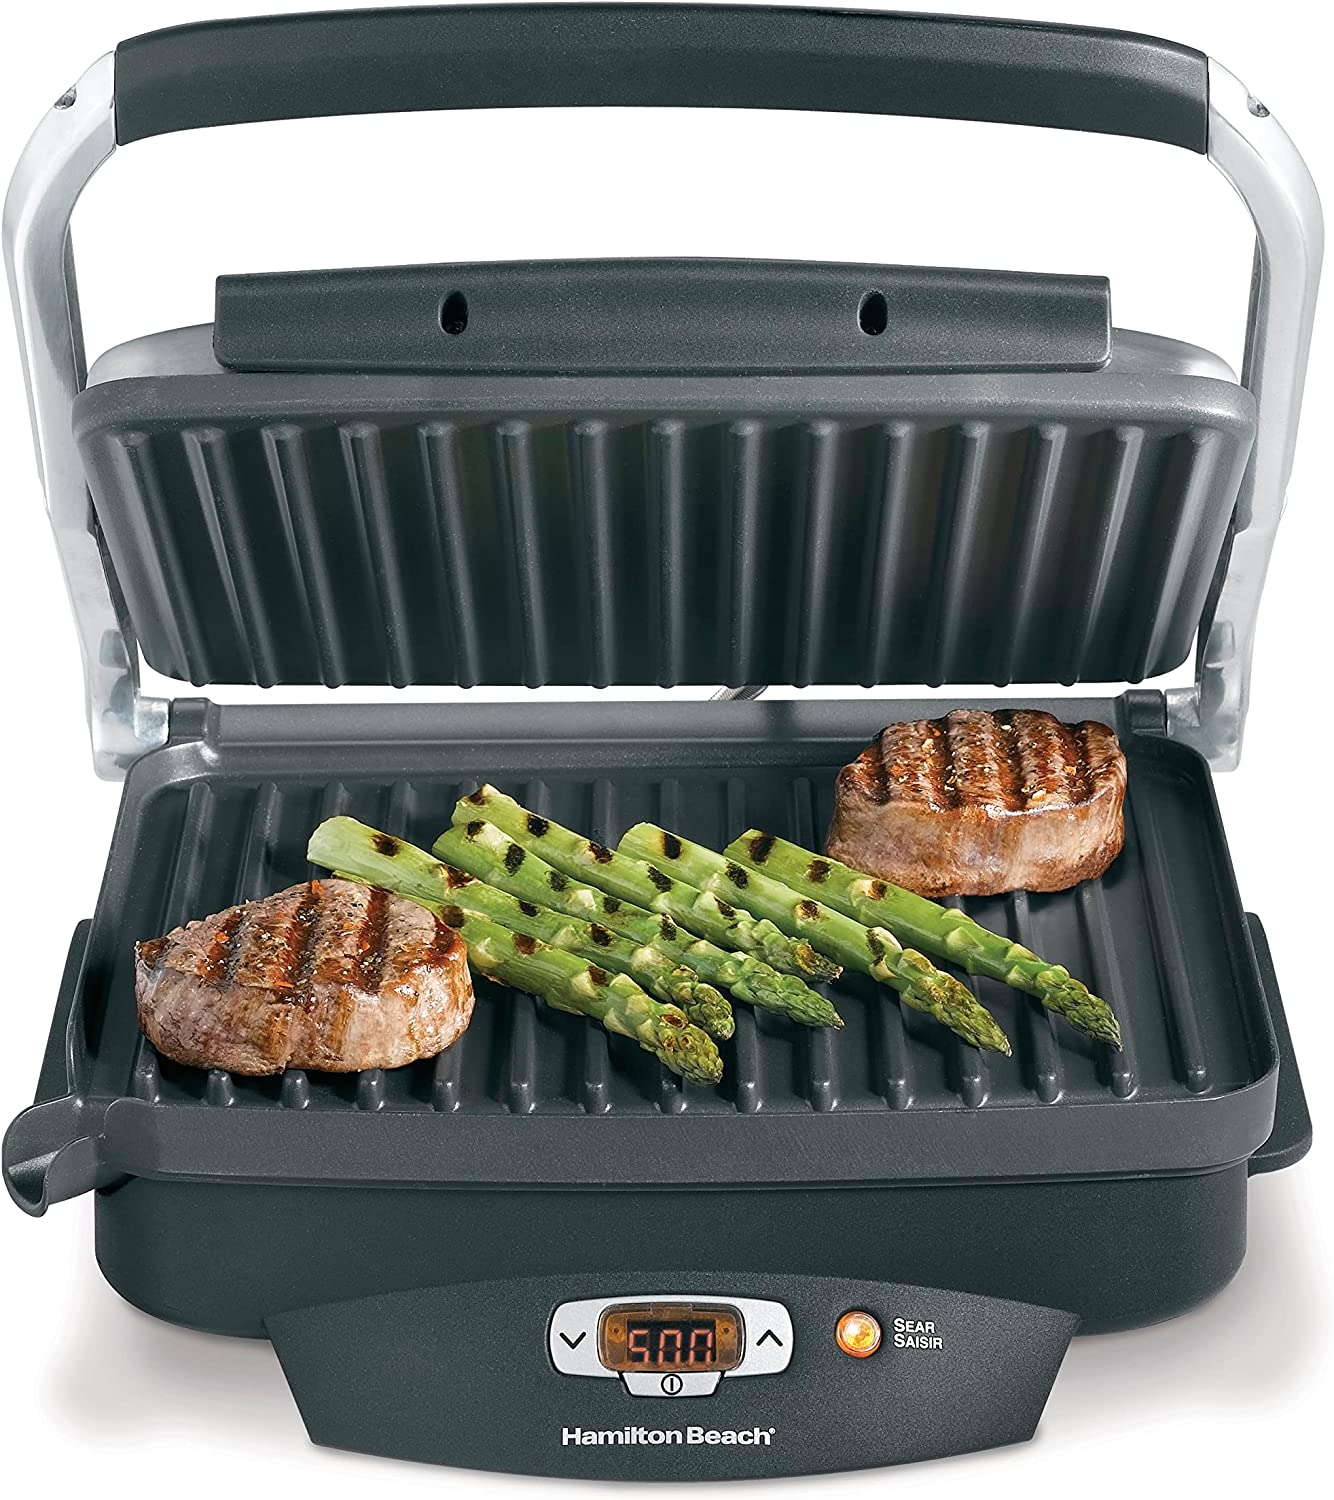 Hamilton Beach Steak Lover’s Electric Indoor Searing Grill, Nonstick 100 Square, Stainless Steel (25331), Black and Stainless,